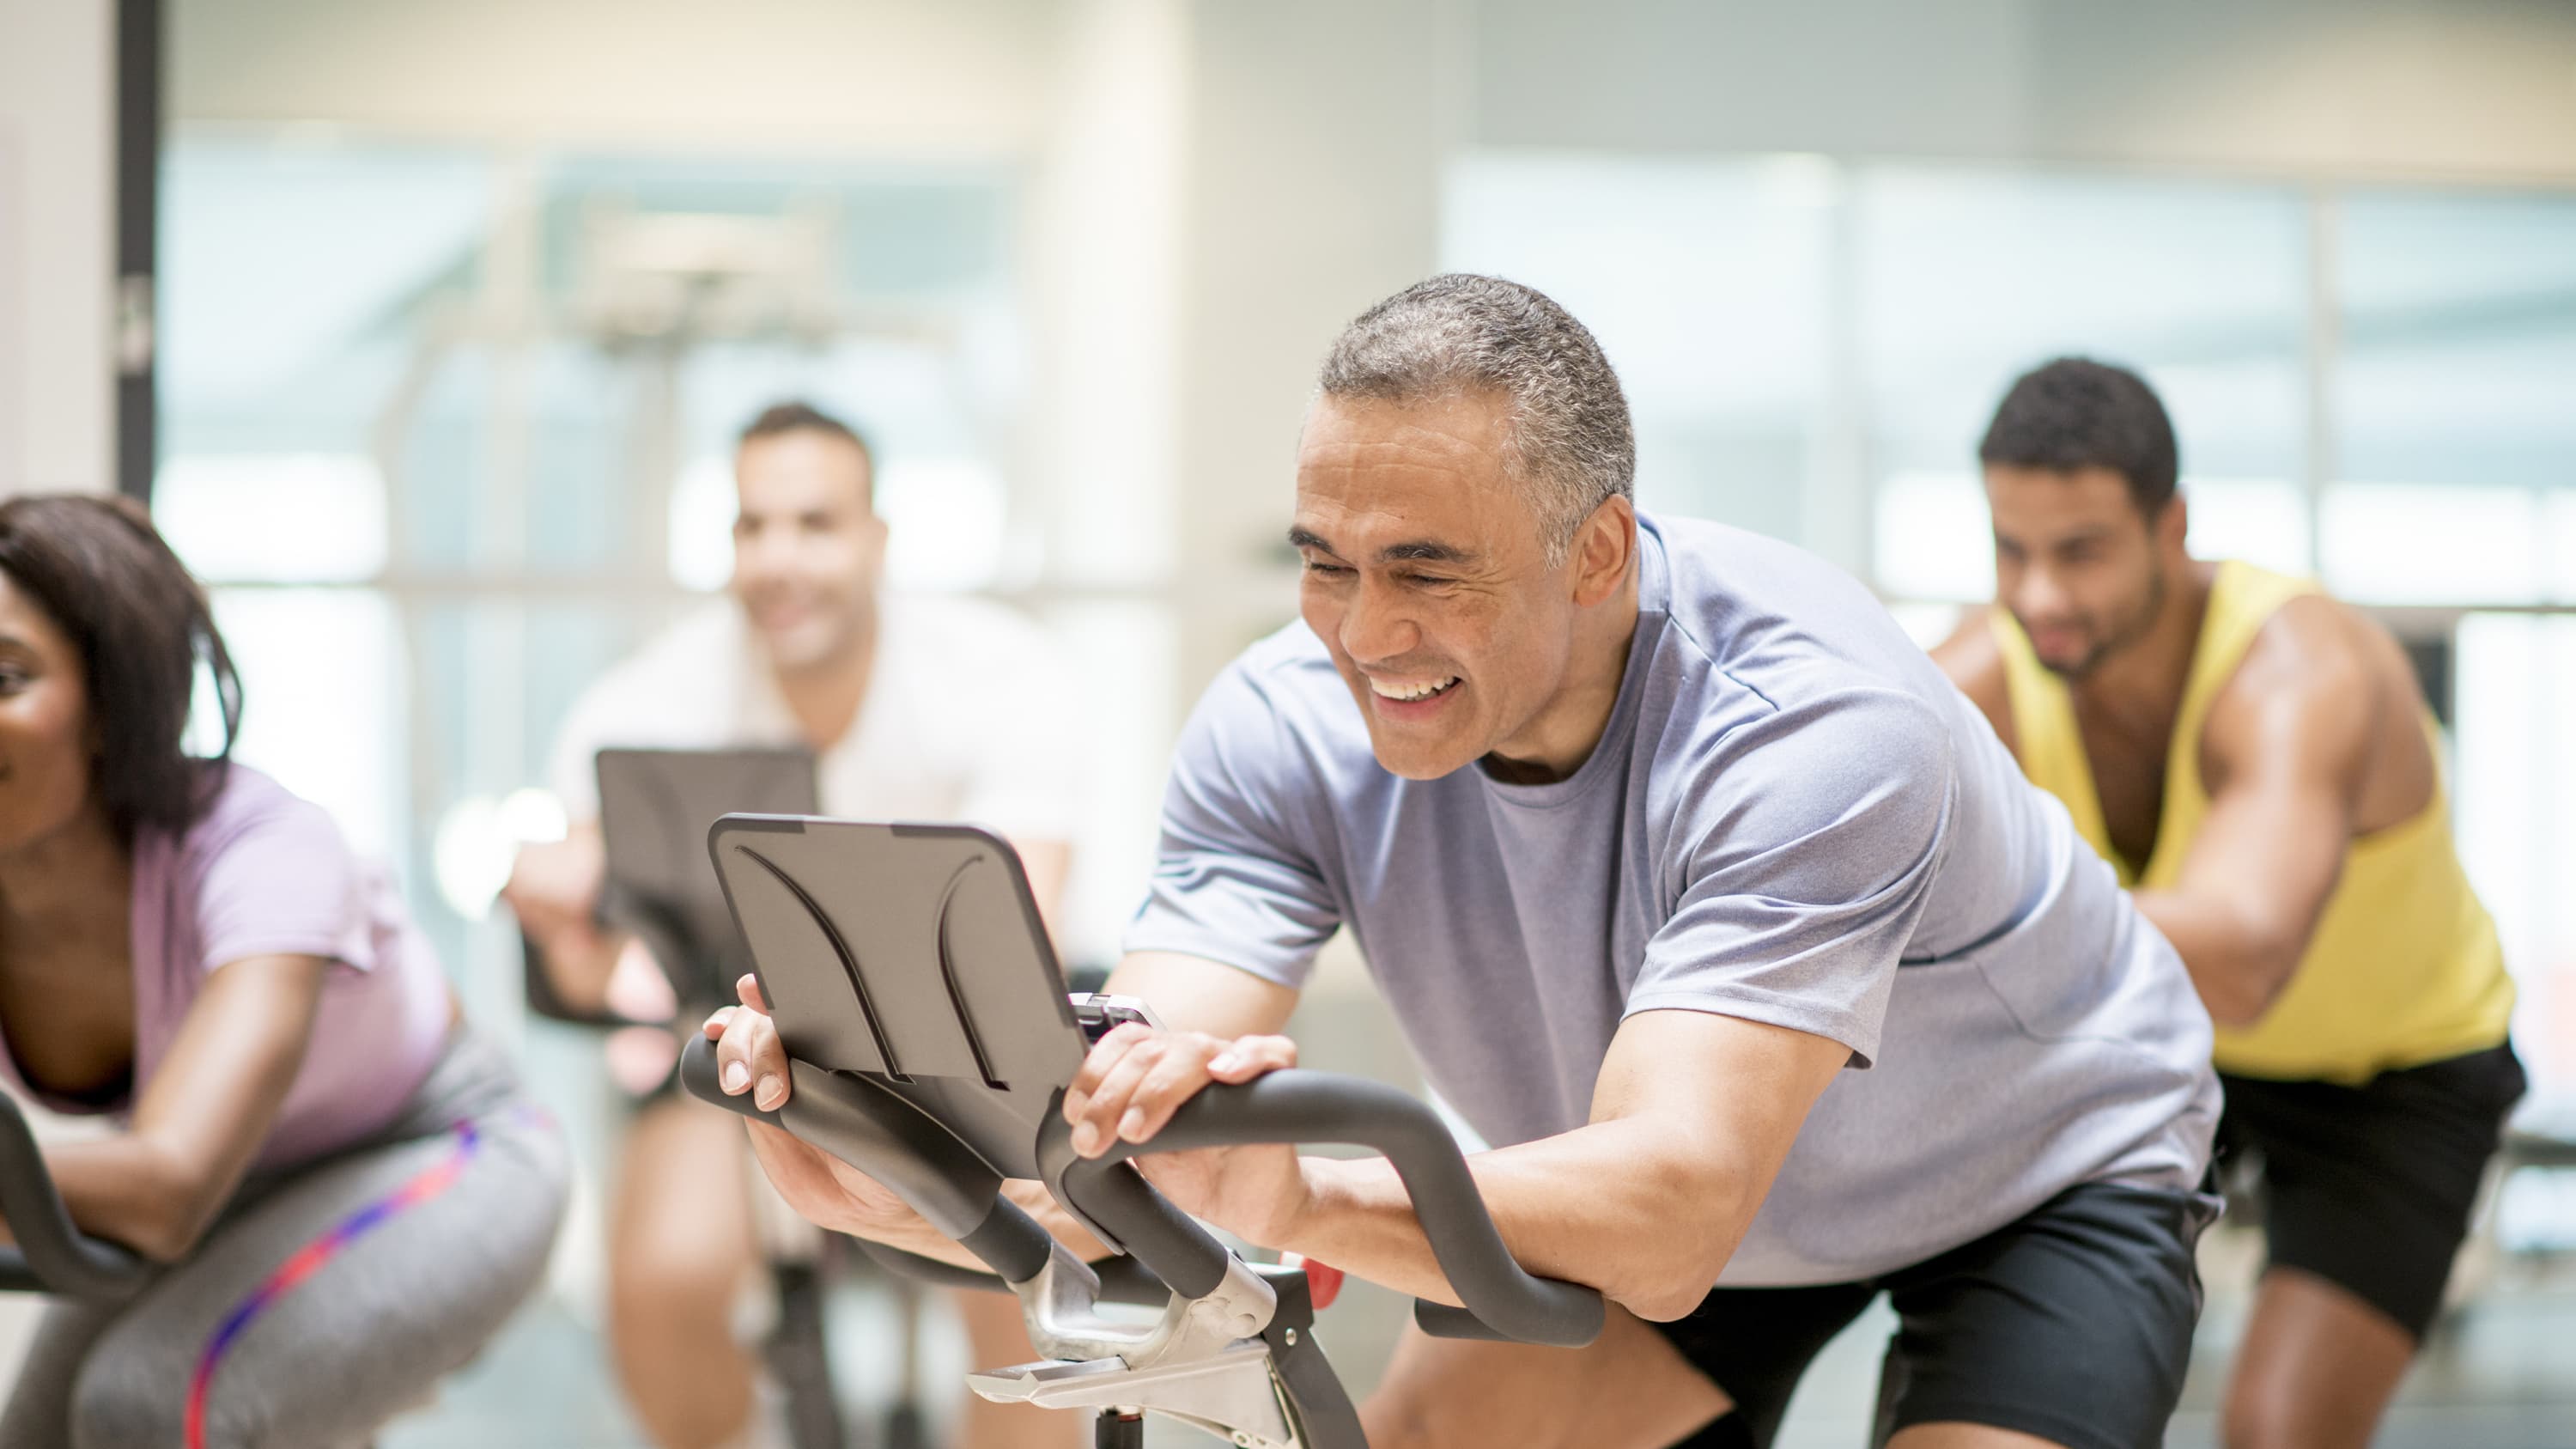 A middle-aged man is back in the gym on the exercise bike after treatment for coronary atherosclerosis.